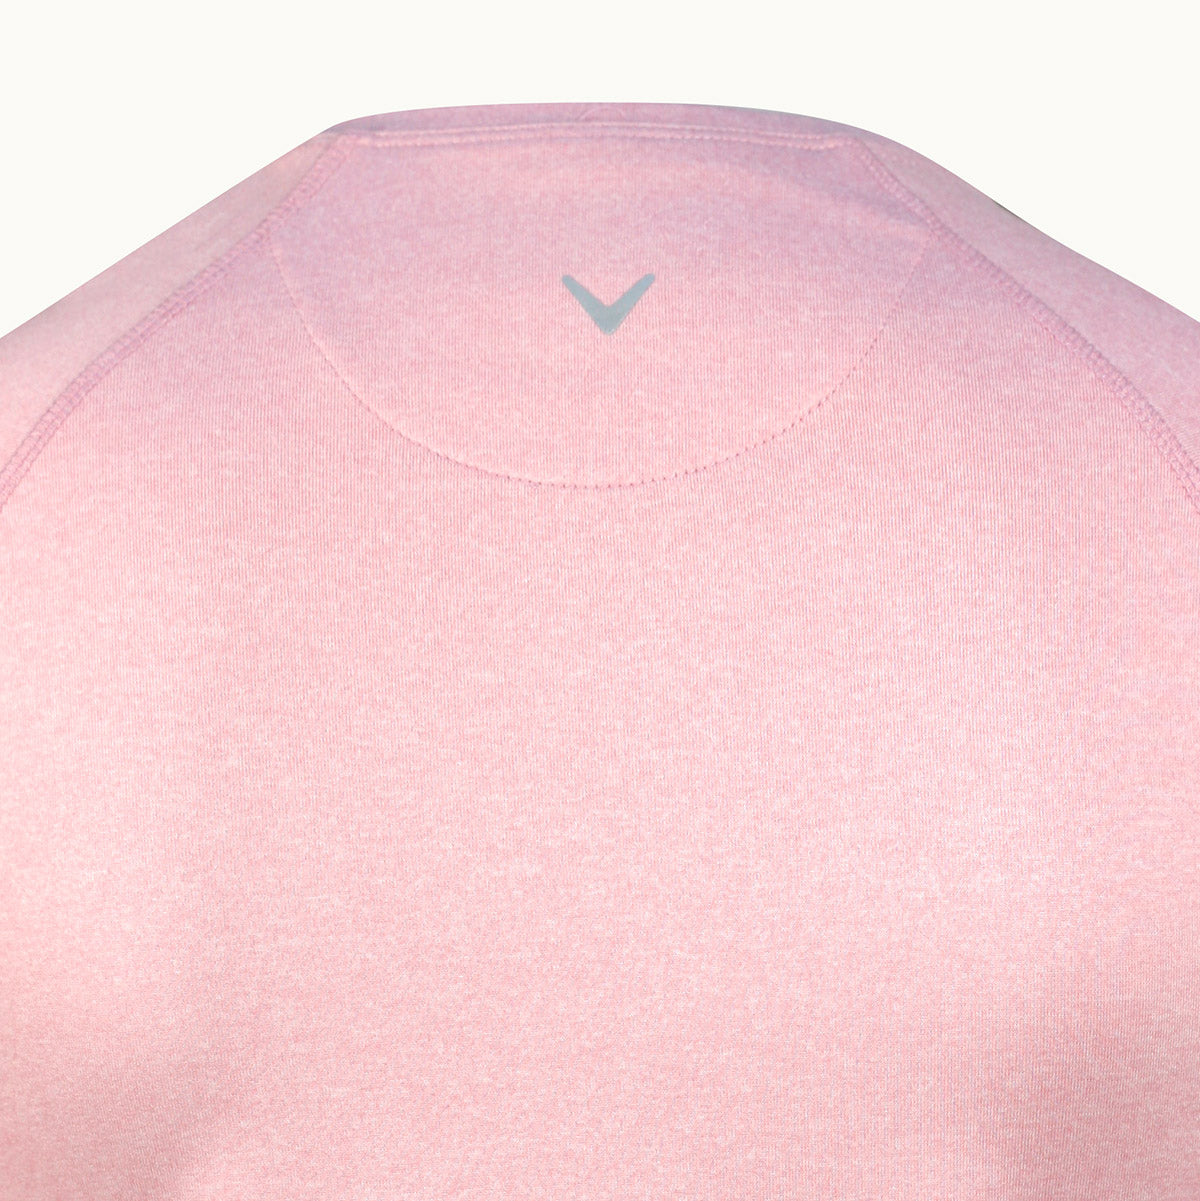 Callaway Ladies Long Sleeve Crew Neck Base Layer in Pink Nectar Heather